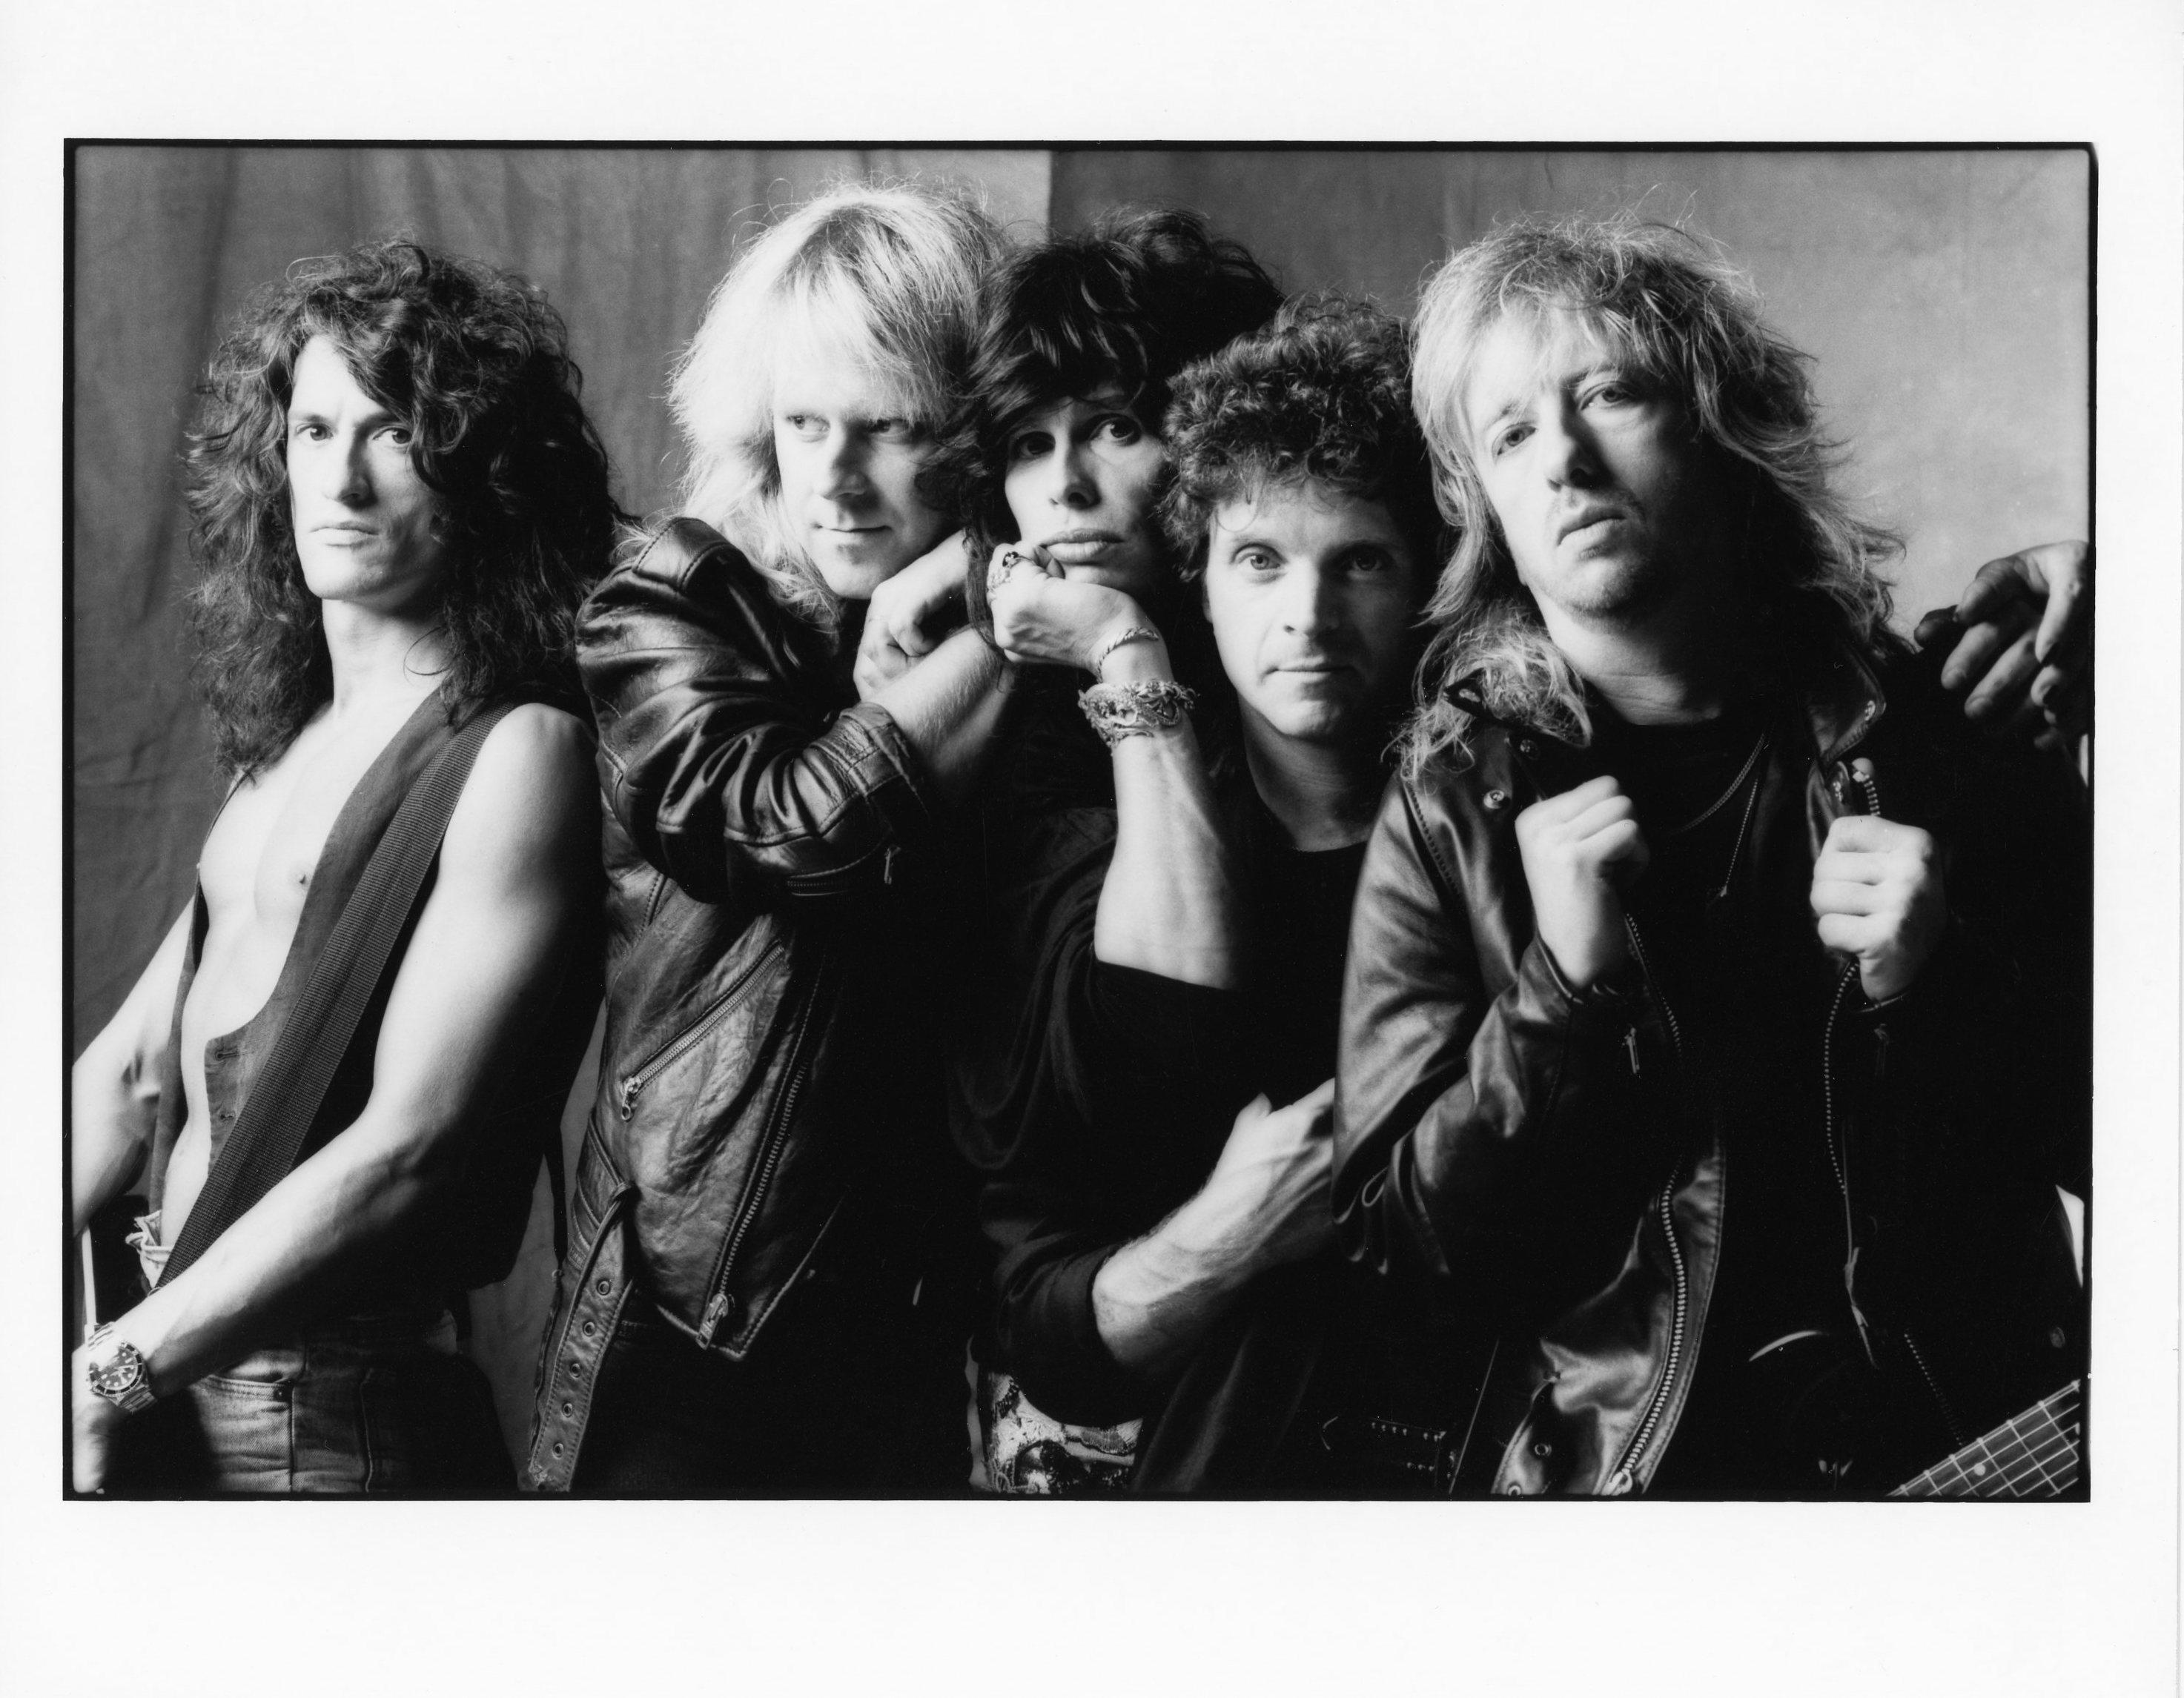 Original vintage 8x10” work print from Norman Seeff of Aerosmith. Hand printed in 1988 at the time of the photoshoot, signed on the back by Norman Seeff and stamped in 2018 for authentication.

In excellent condition having been stored flat in a